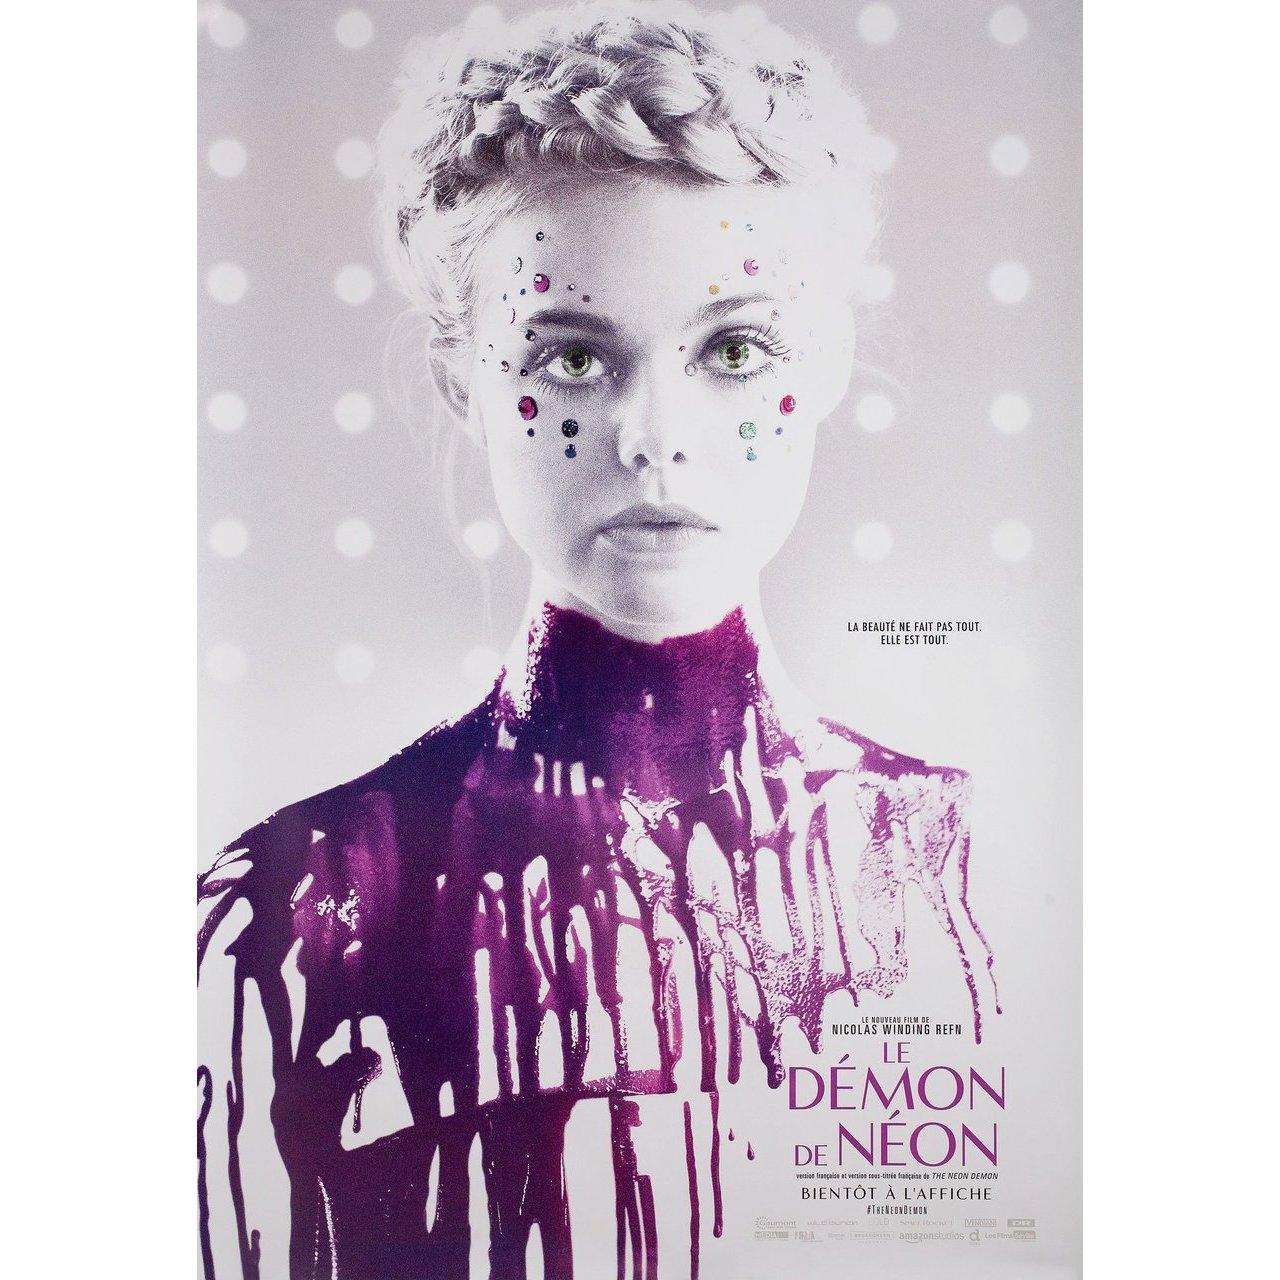 Original 2016 Canadian one sheet poster for the film The Neon Demon directed by Nicolas Winding Refn with Elle Fanning / Karl Glusman / Jena MALONE / Bella Heathcote. Very good-fine condition, rolled. Please note: the size is stated in inches and